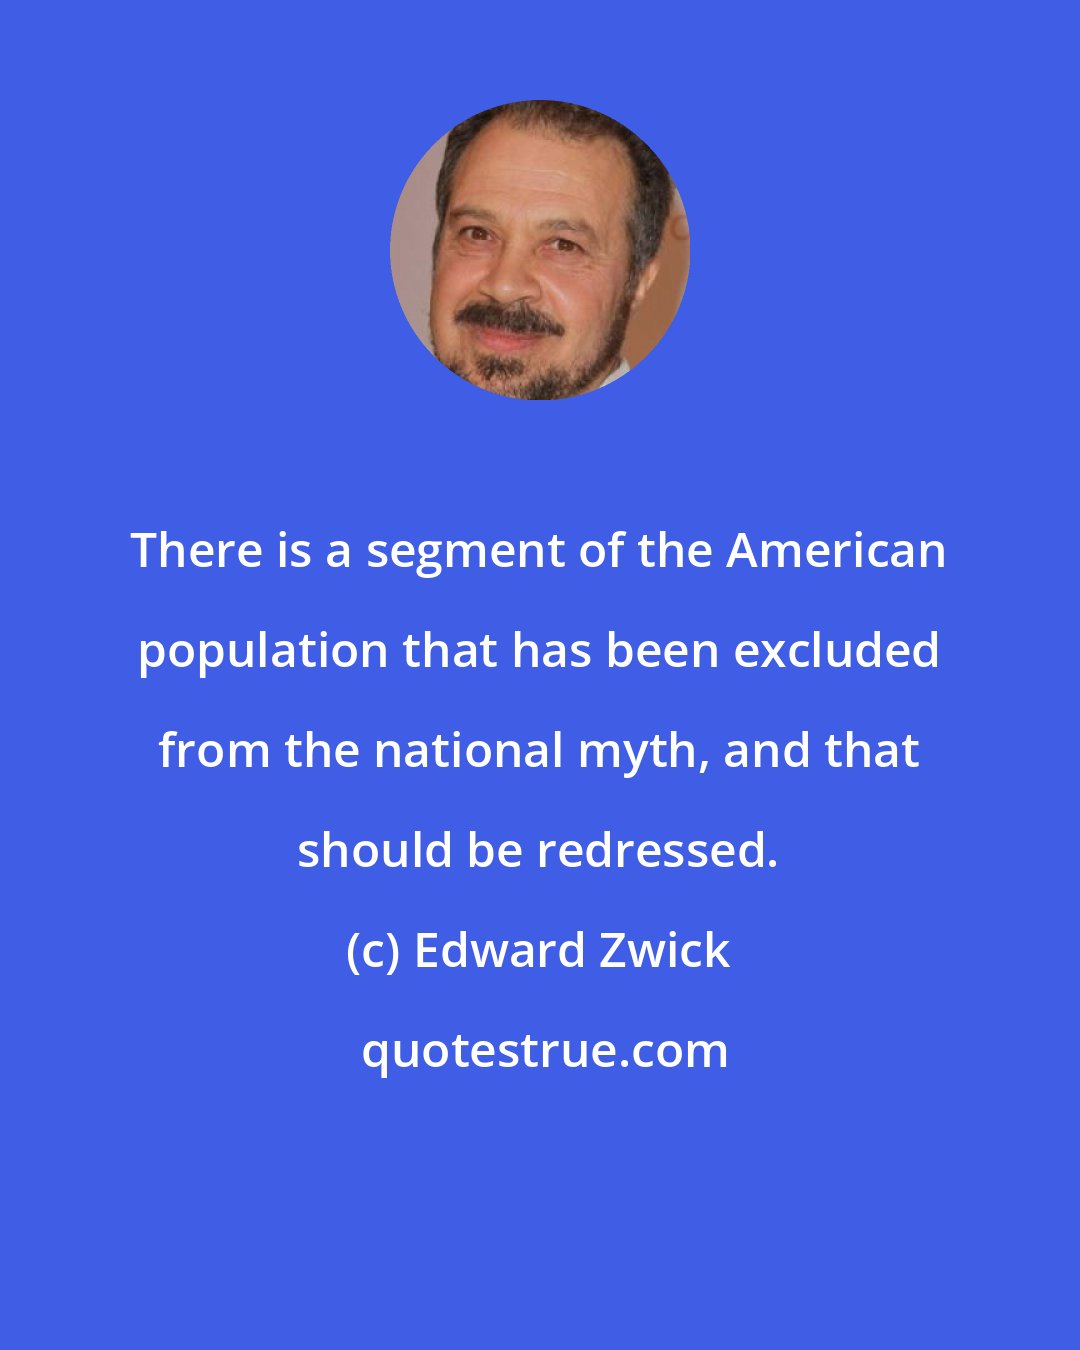 Edward Zwick: There is a segment of the American population that has been excluded from the national myth, and that should be redressed.